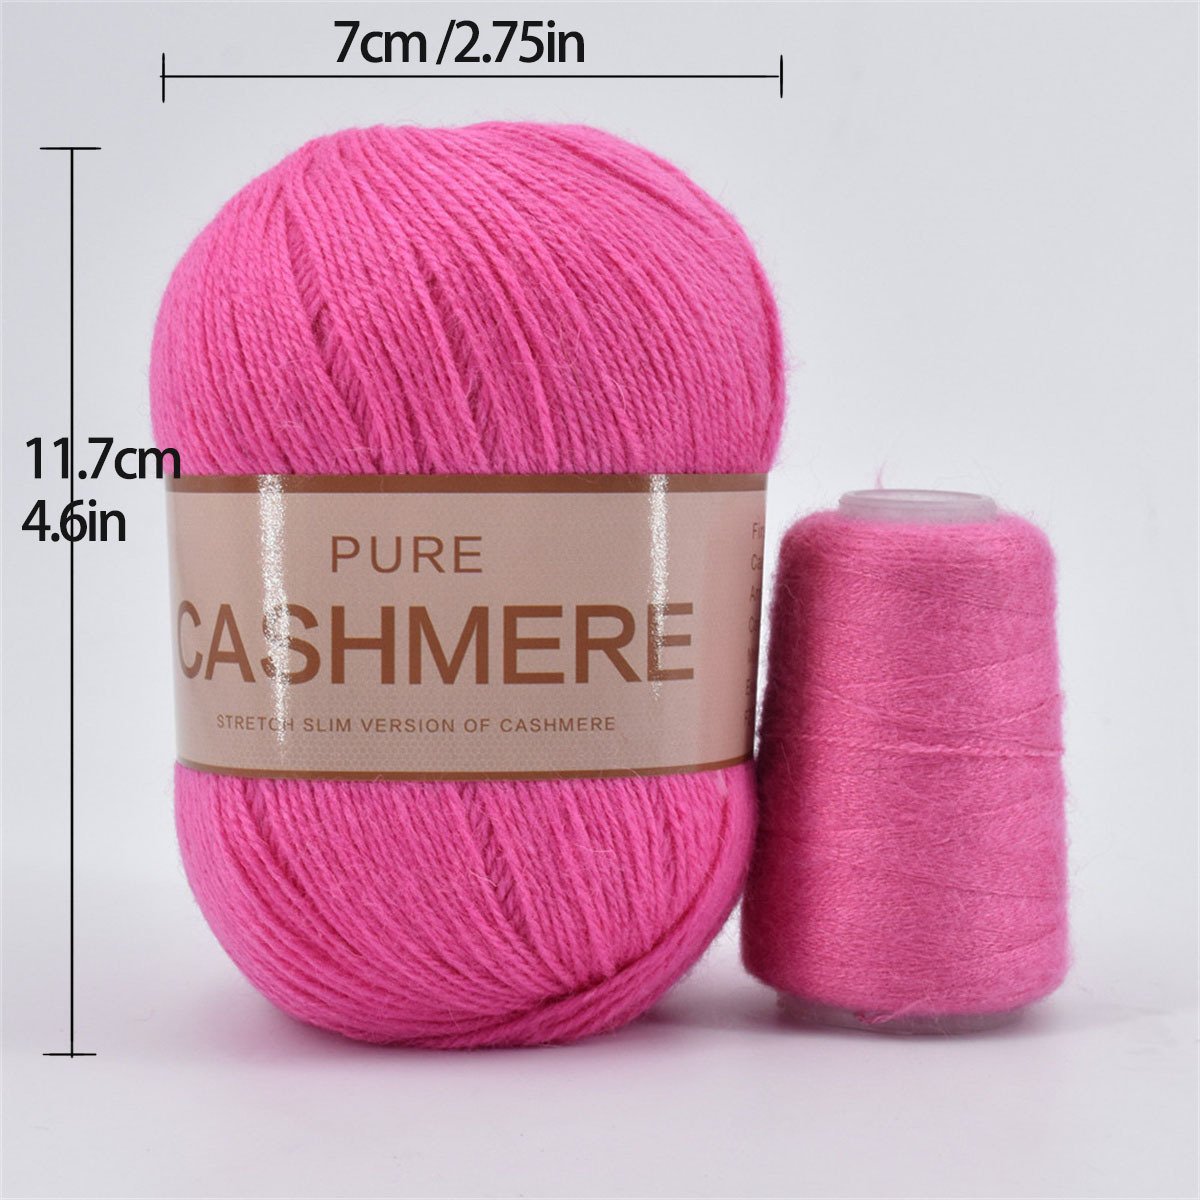 Cashmere Yarn for Crocheting 3-Ply Worsted Pure Mongolian Warm Soft Weaving  Fuzzy Knitting Cashmere Hand Yarn Thread 5pcs